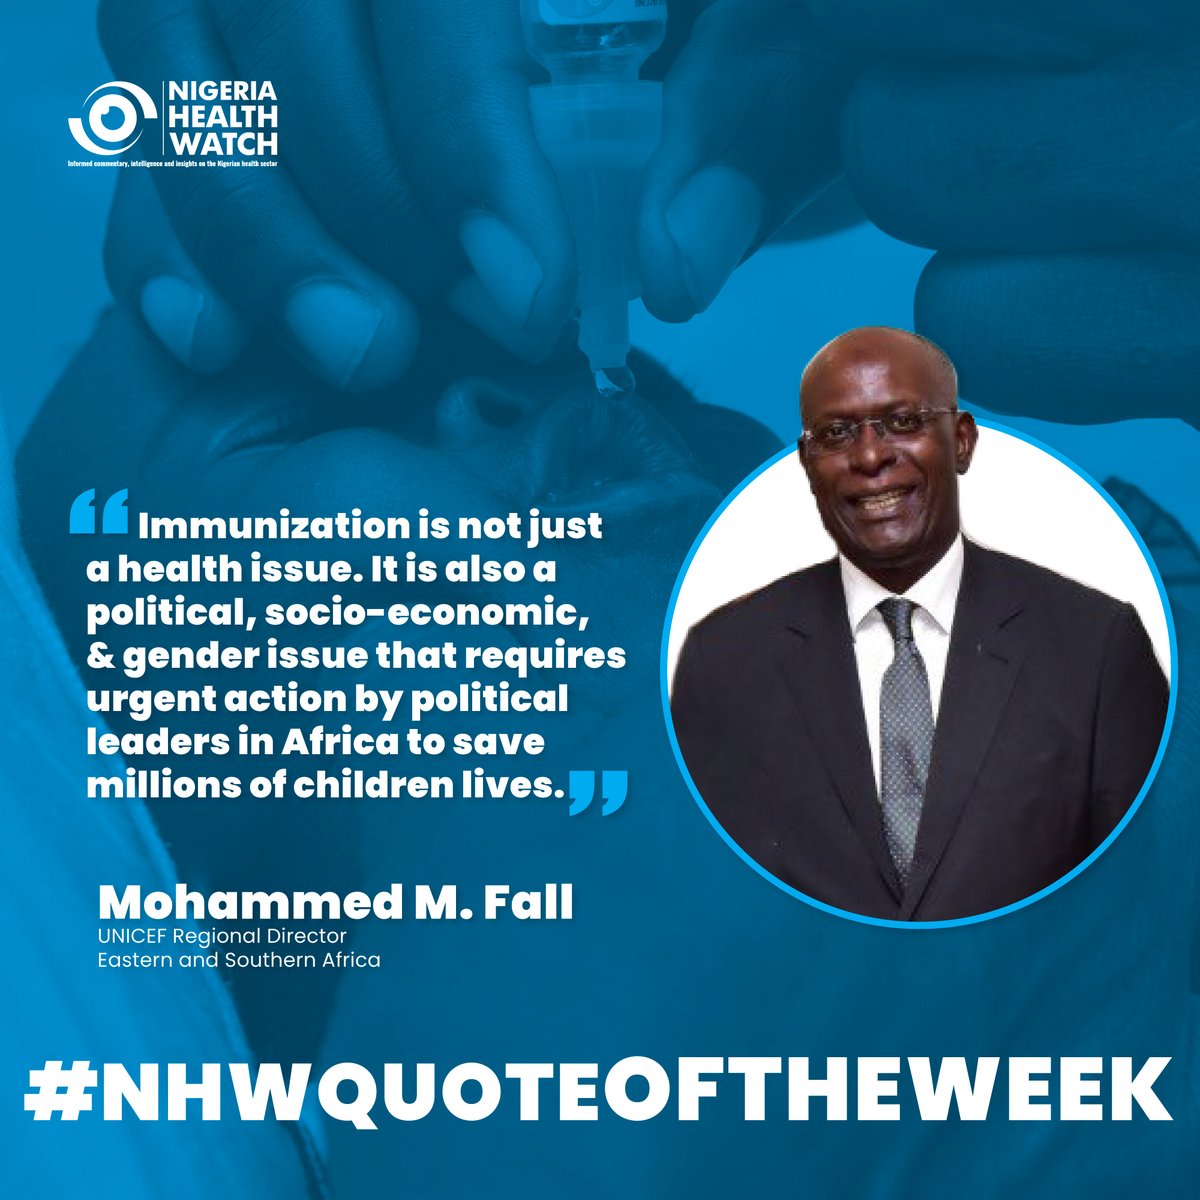 #NHWQUOTEOFTHEWEEK
Outbreaks of vaccine-preventable diseases can harm the economy, trade, tourism, & daily life. 
Vaccinations are key to protecting global health security. Let's work together - governments, CSOs, NGOs, health workers, & parents - to ensure vaccine access for all